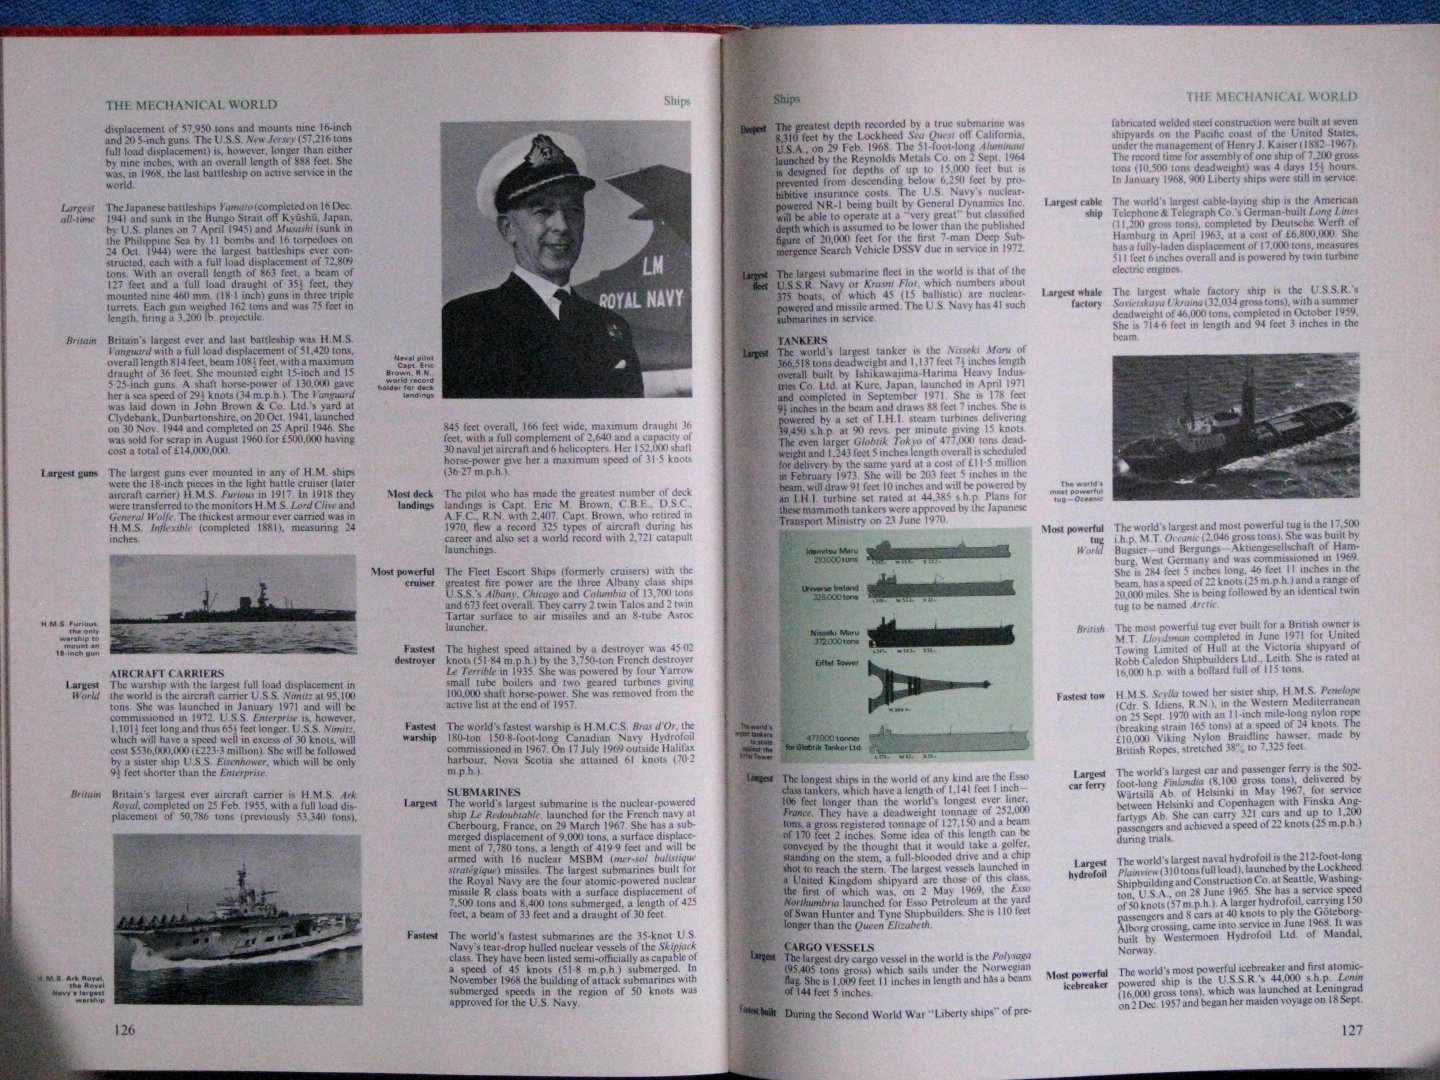 Norris and Ross McWhirter [editors and compilers] - Reeves, Denzil [layout and illustrations] - The Guinness Book of Records 1971 [eighteenth edition]